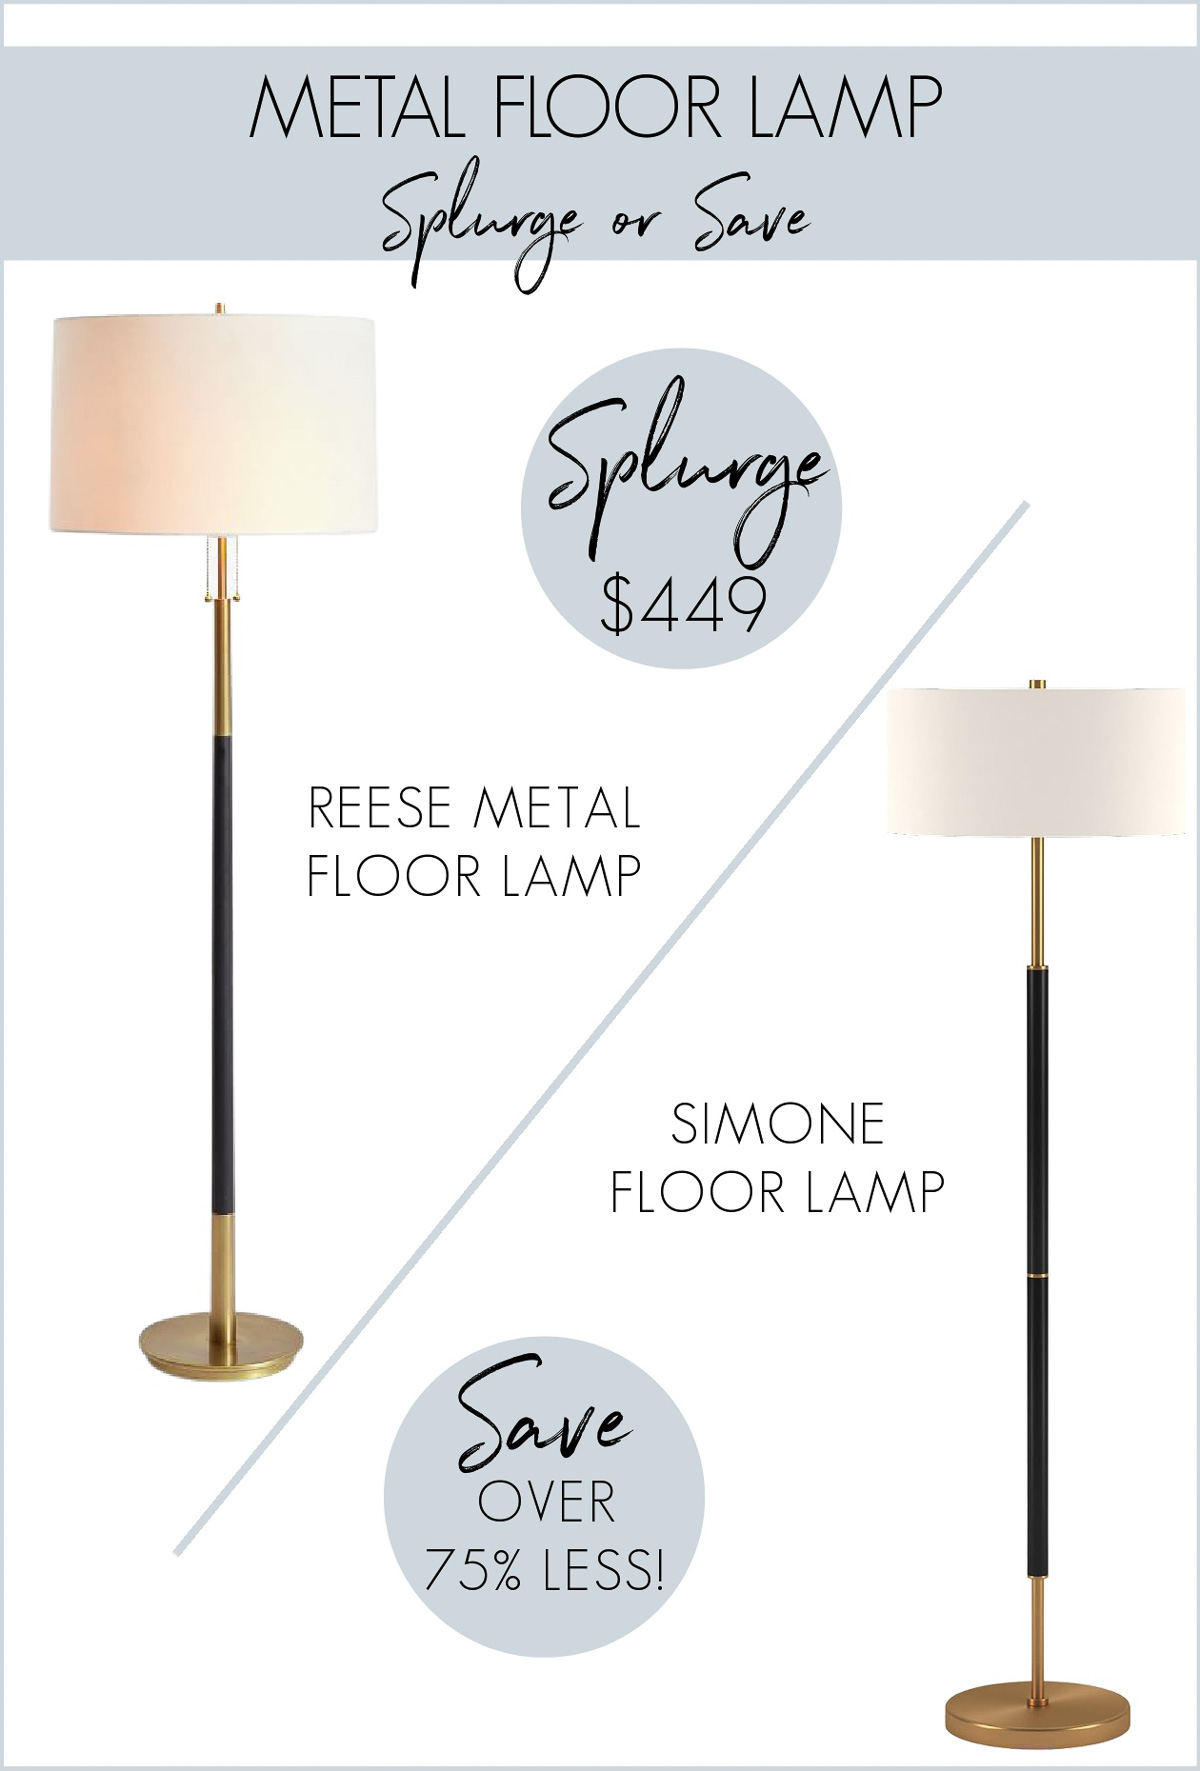 Metal floor lamp look for less - a favorite cheap home decor find!